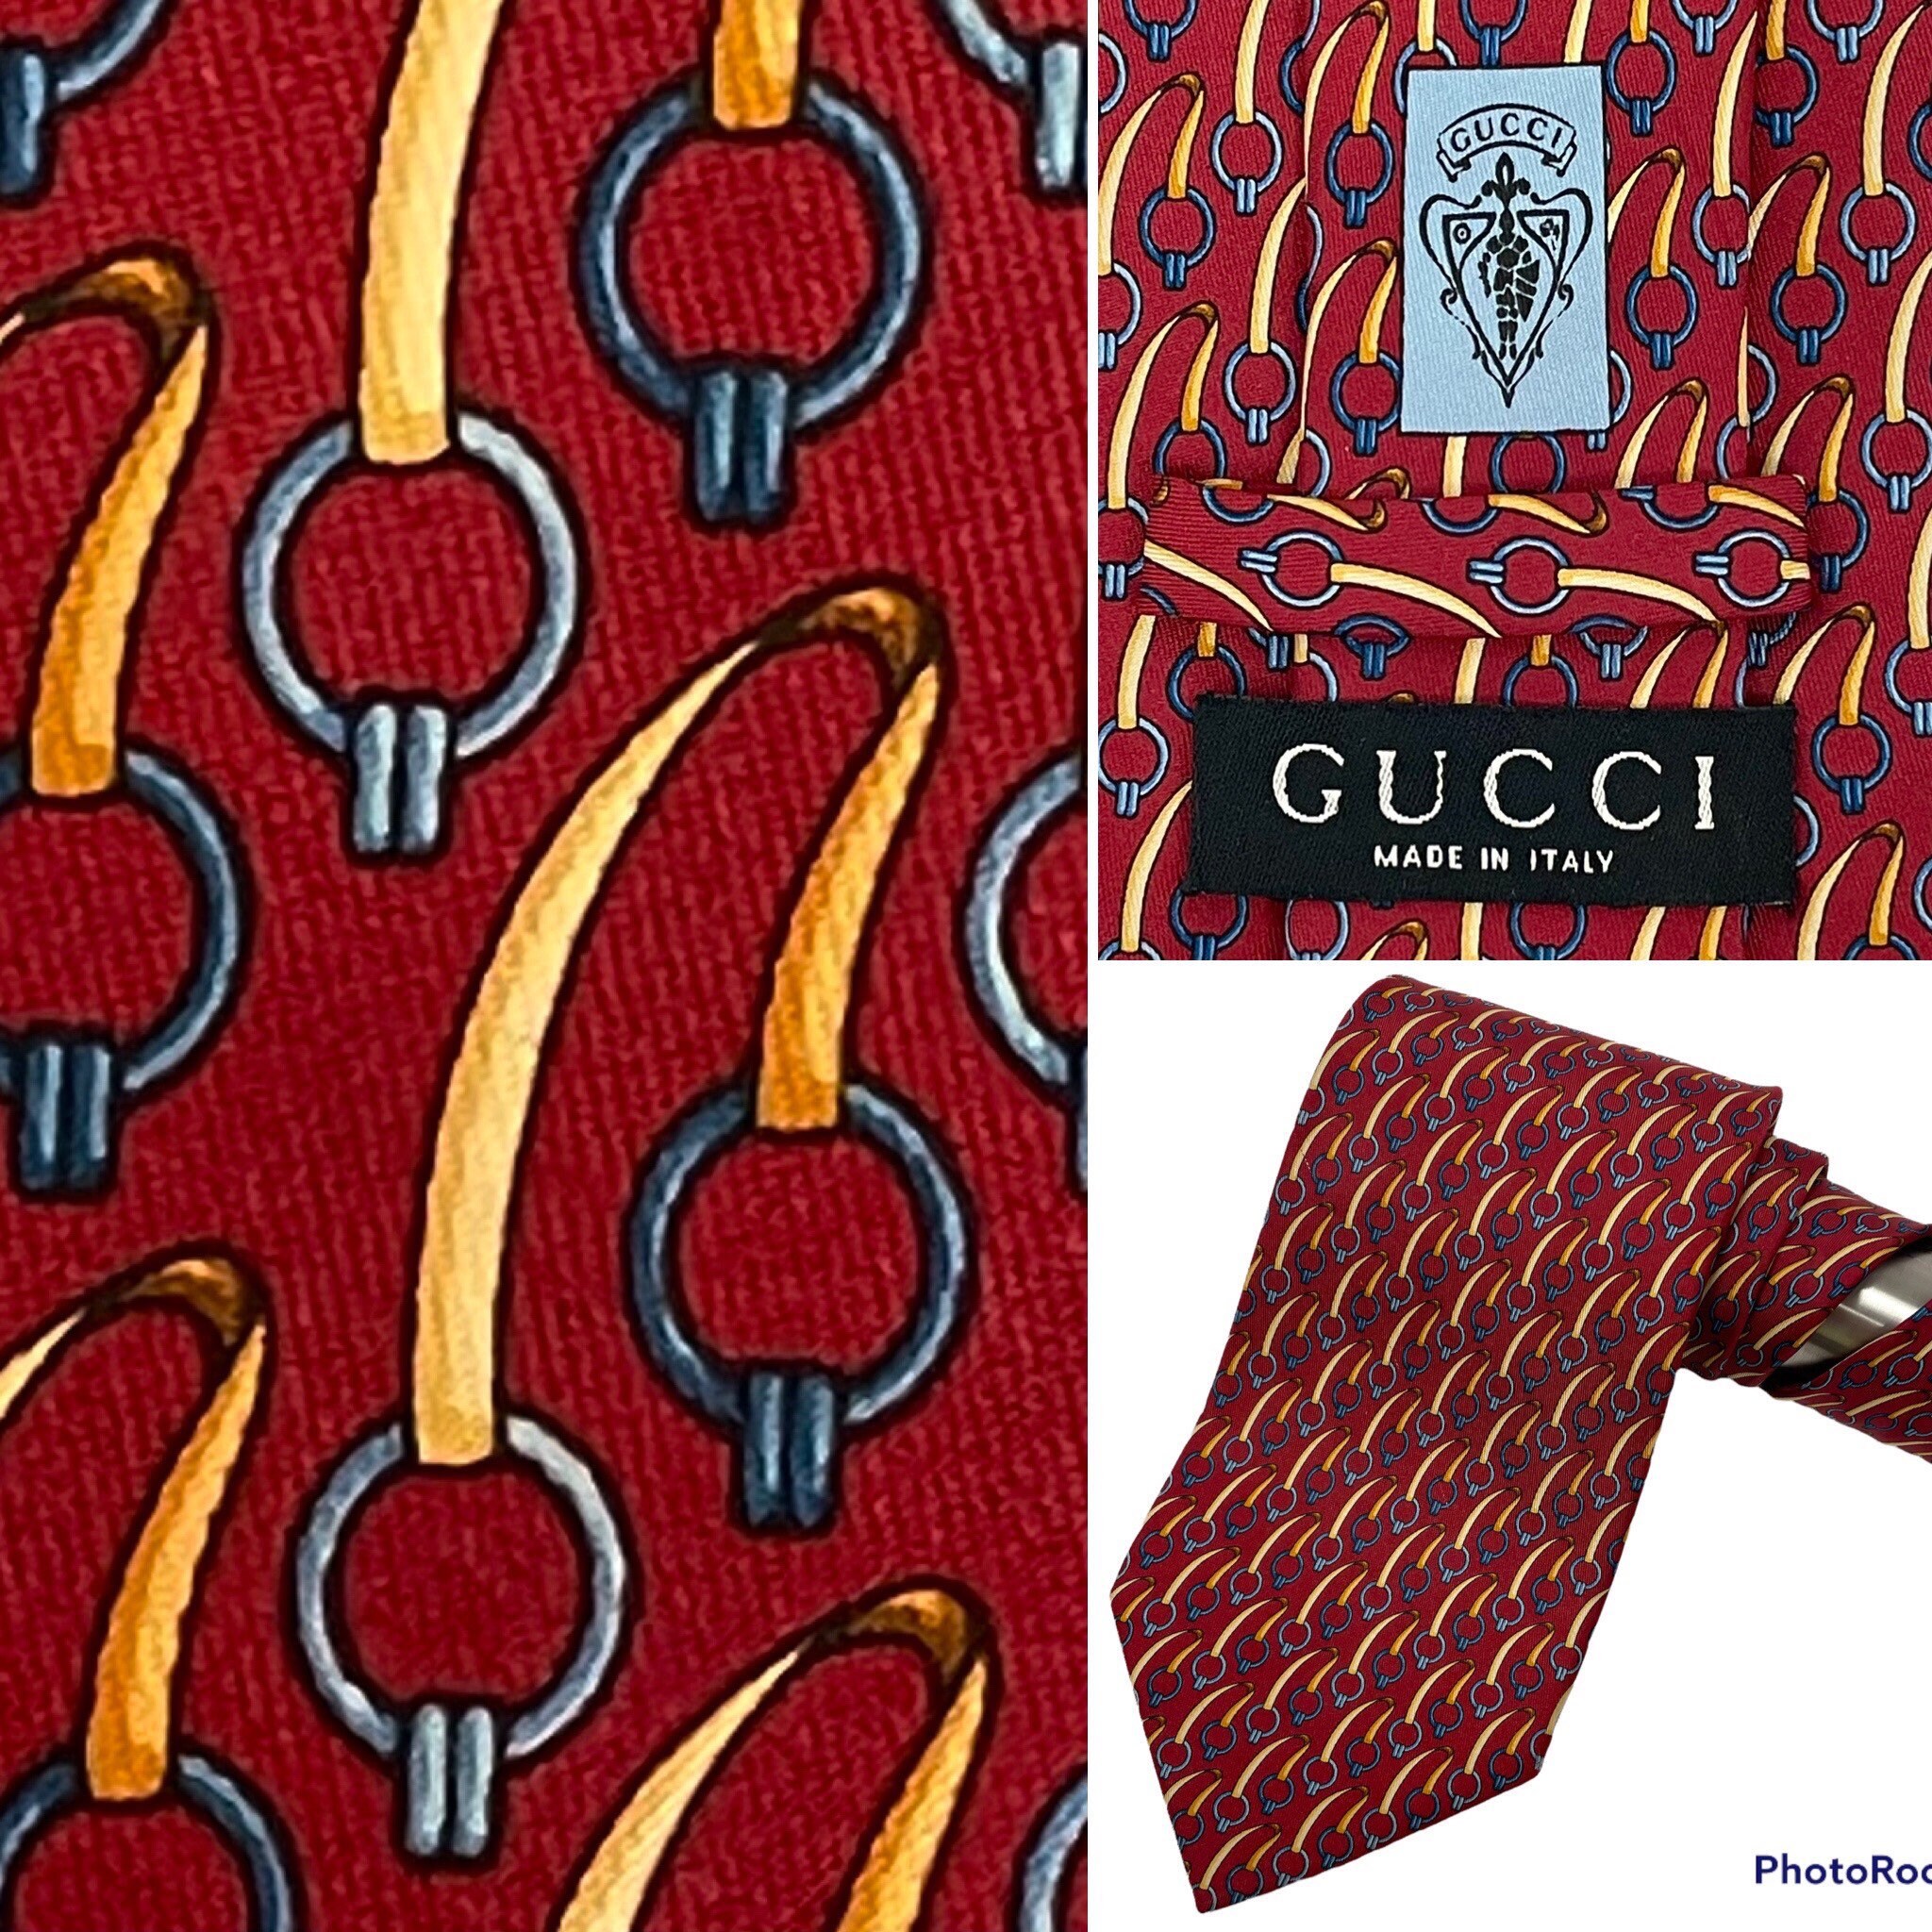 Gucci Men's Red Silk Pajamas with Horse Bit and Animal Print Tom Ford Era